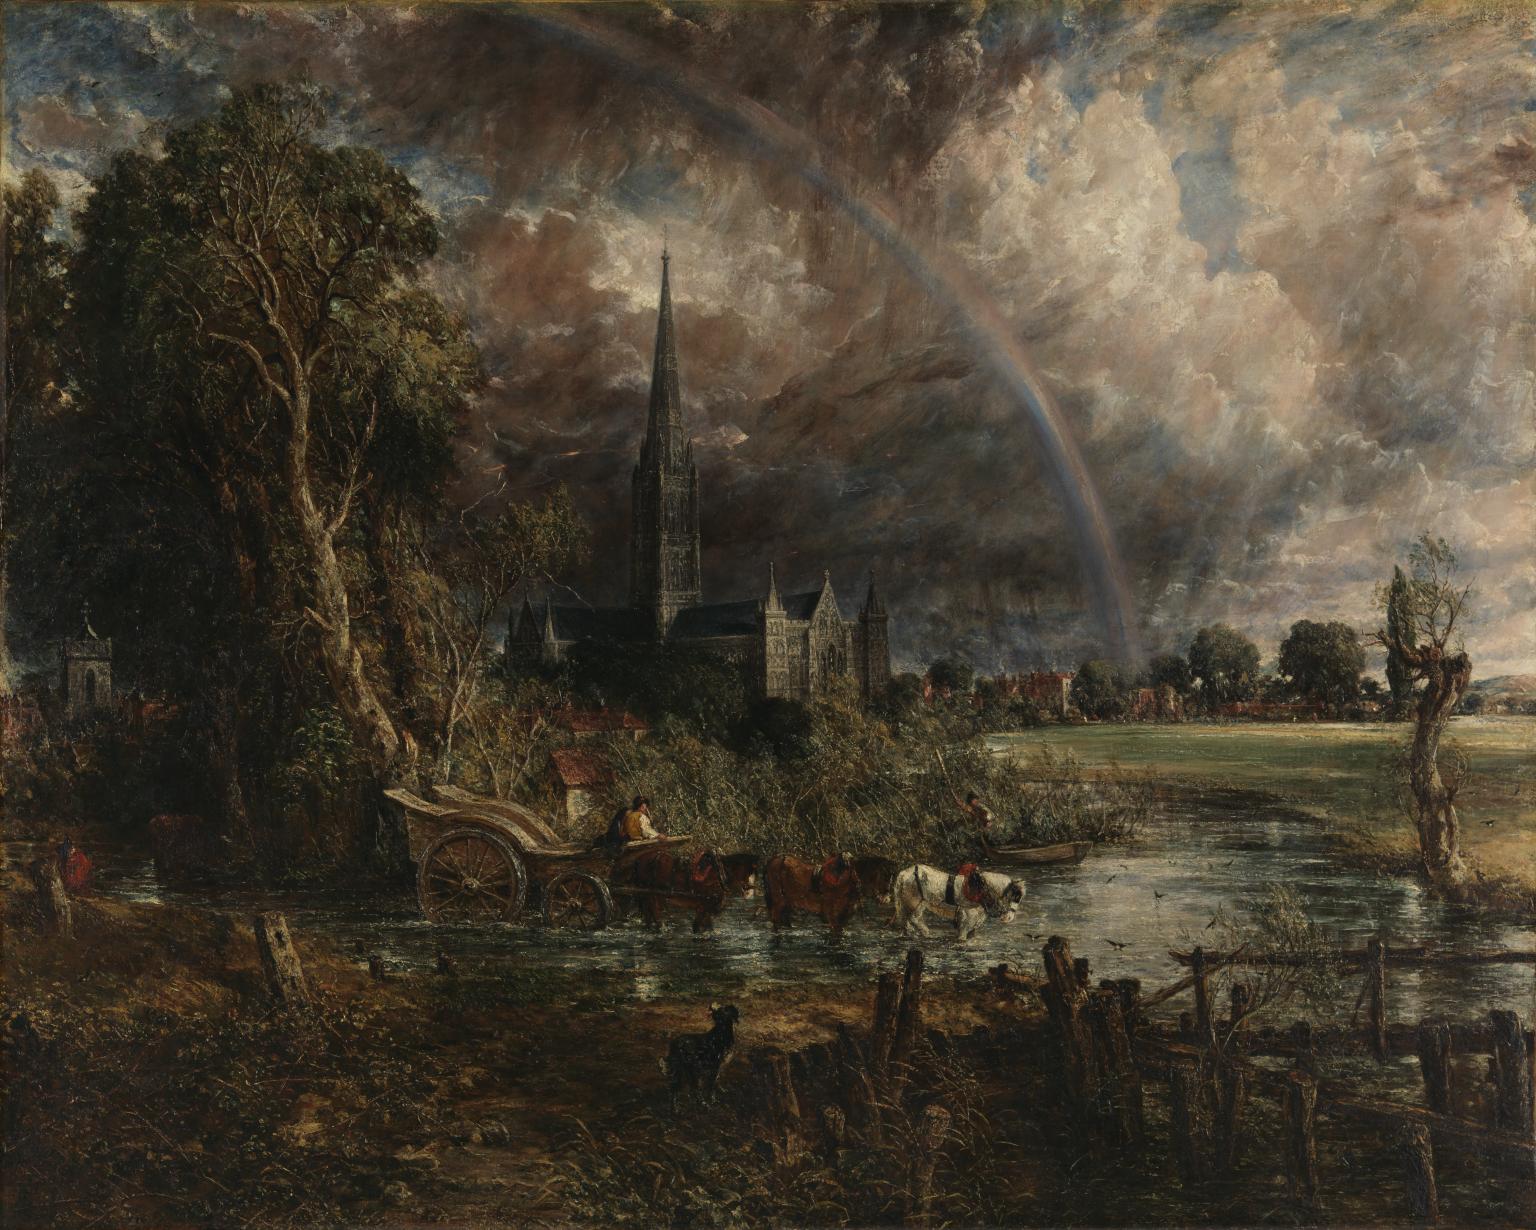 nineteenth century oil painting with expressive brushwork, a view across water and lush green fields, medieval Salisbury Cathedral prominent in the background, a looming stormy sky above with a rainbow arching across